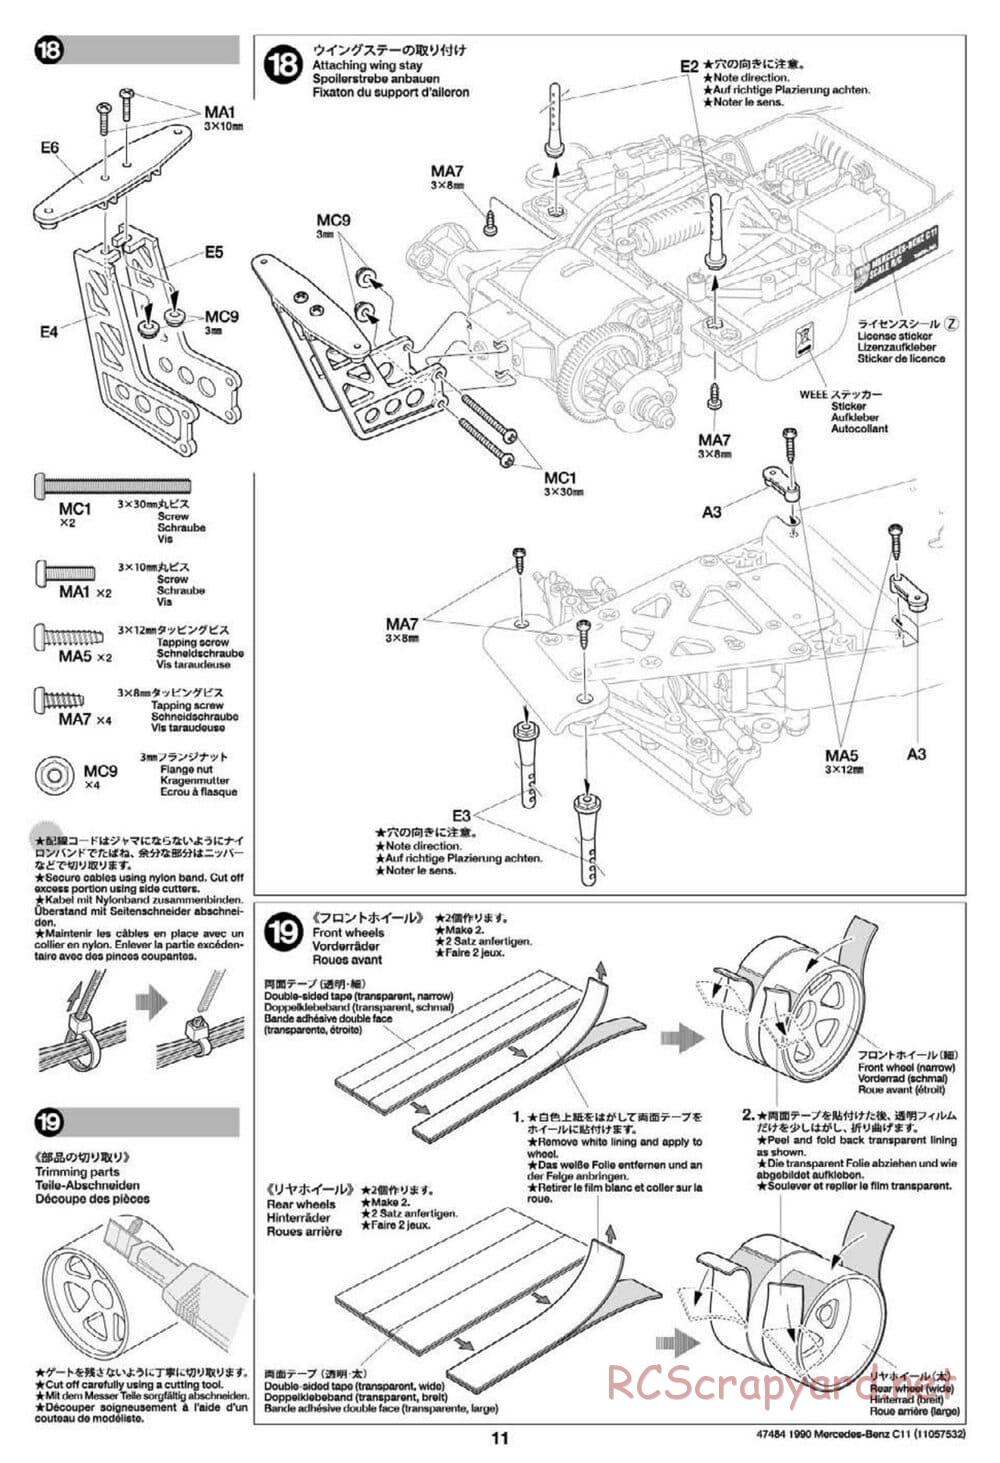 Tamiya - 1990 Mercedes-Benz C11 - Group-C Chassis - Manual - Page 11